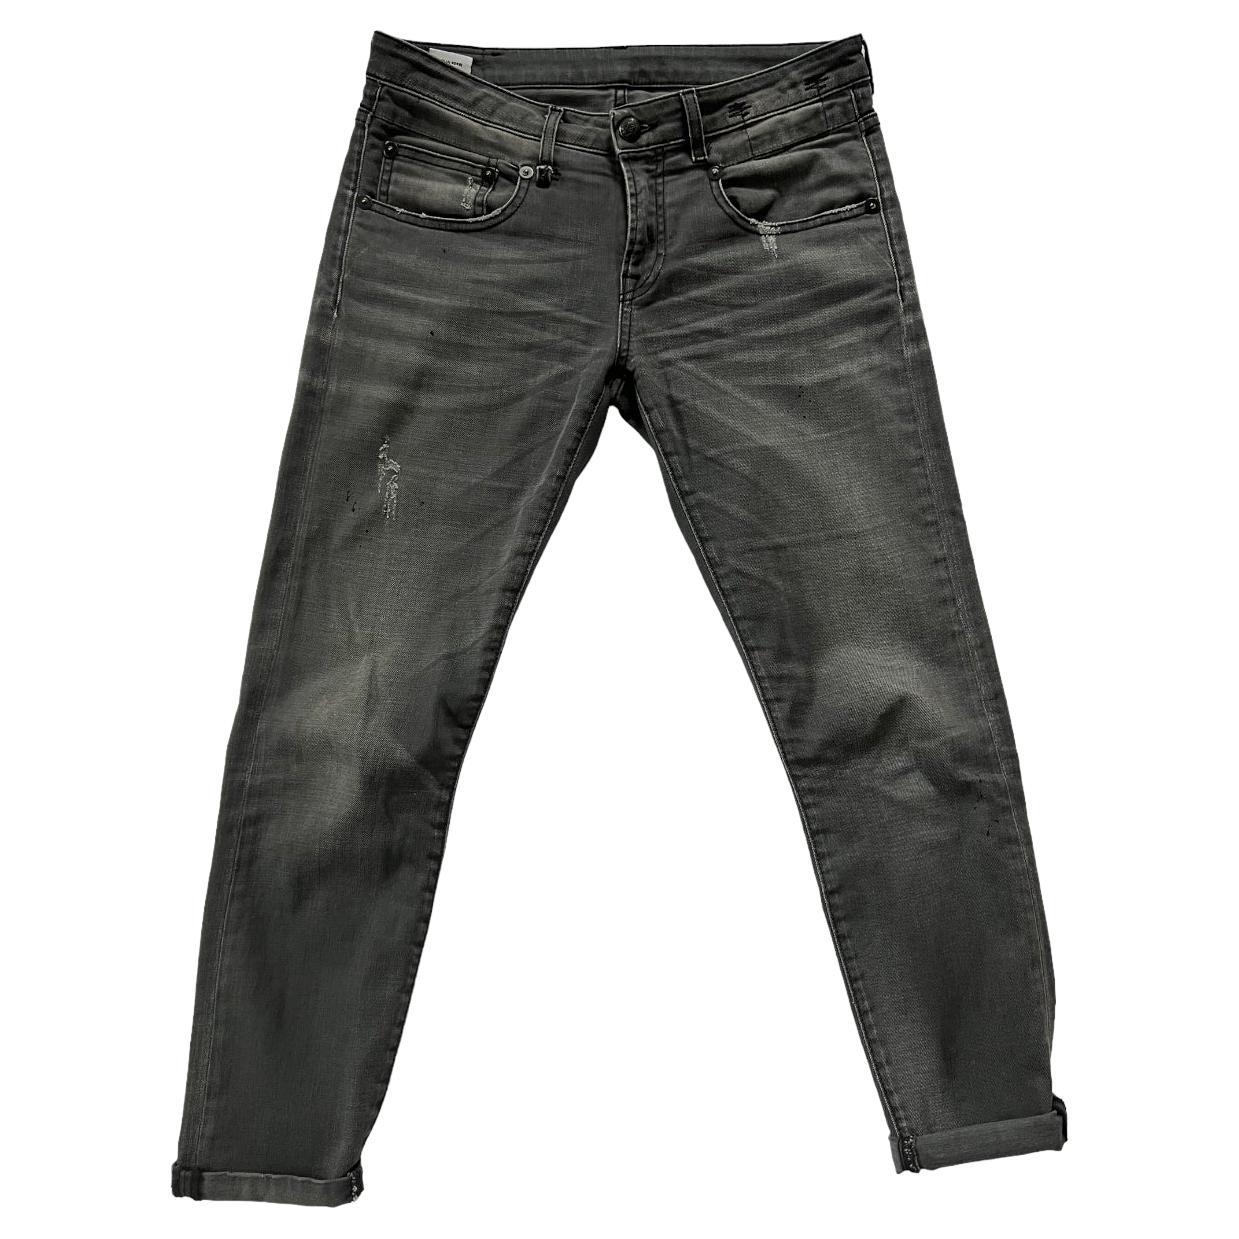 R13 Grey Orion Boy Skinny Jeans Pants, Size 27 For Sale